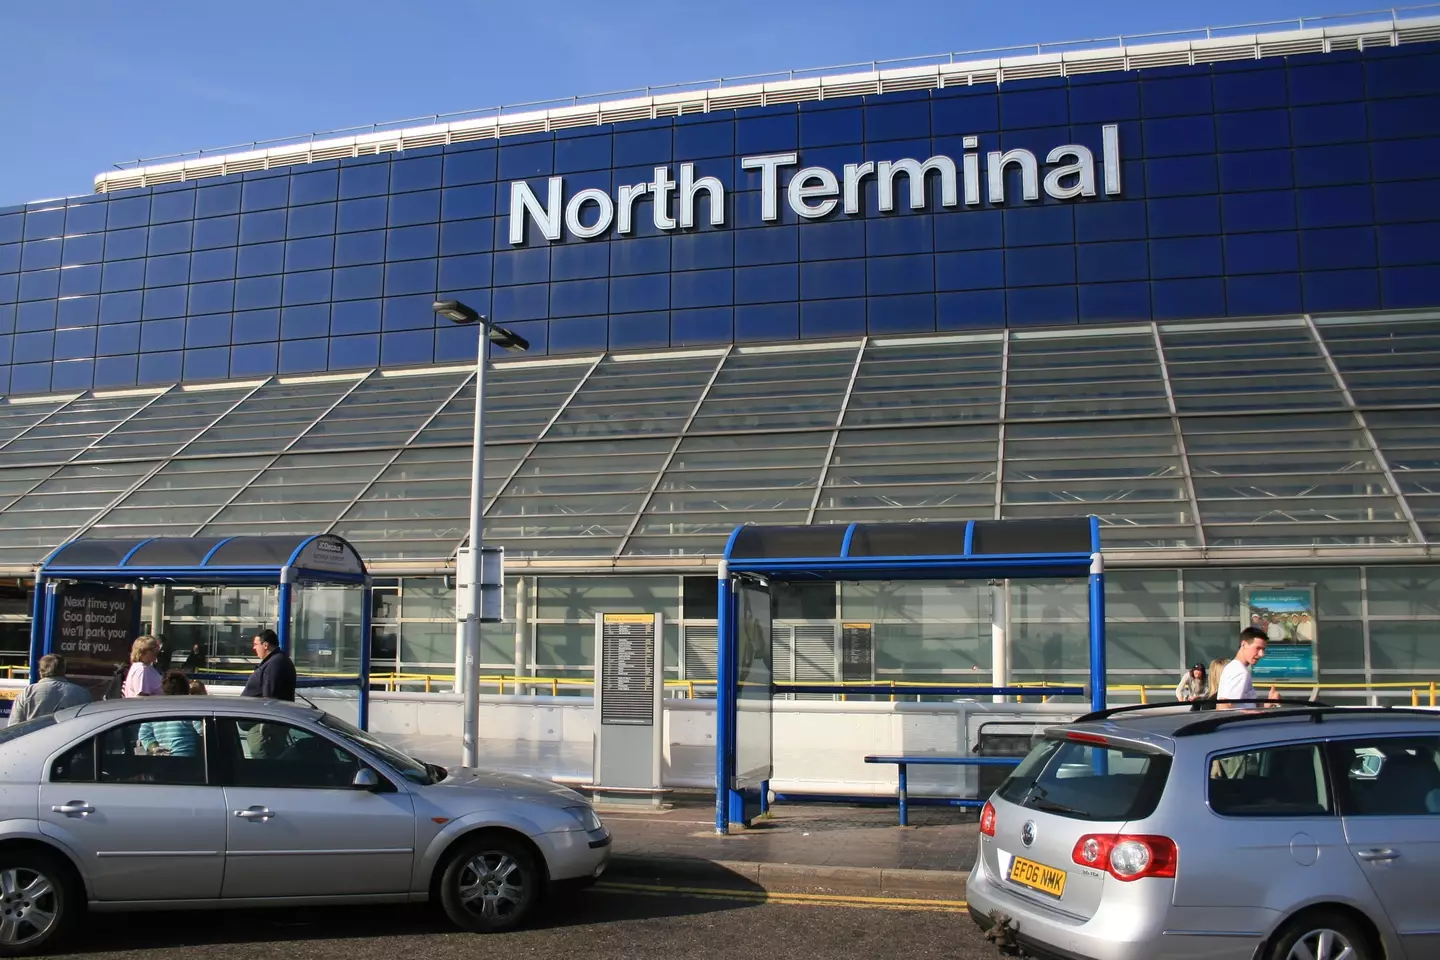 The incident took place at the North Terminal of Gatwick airport.